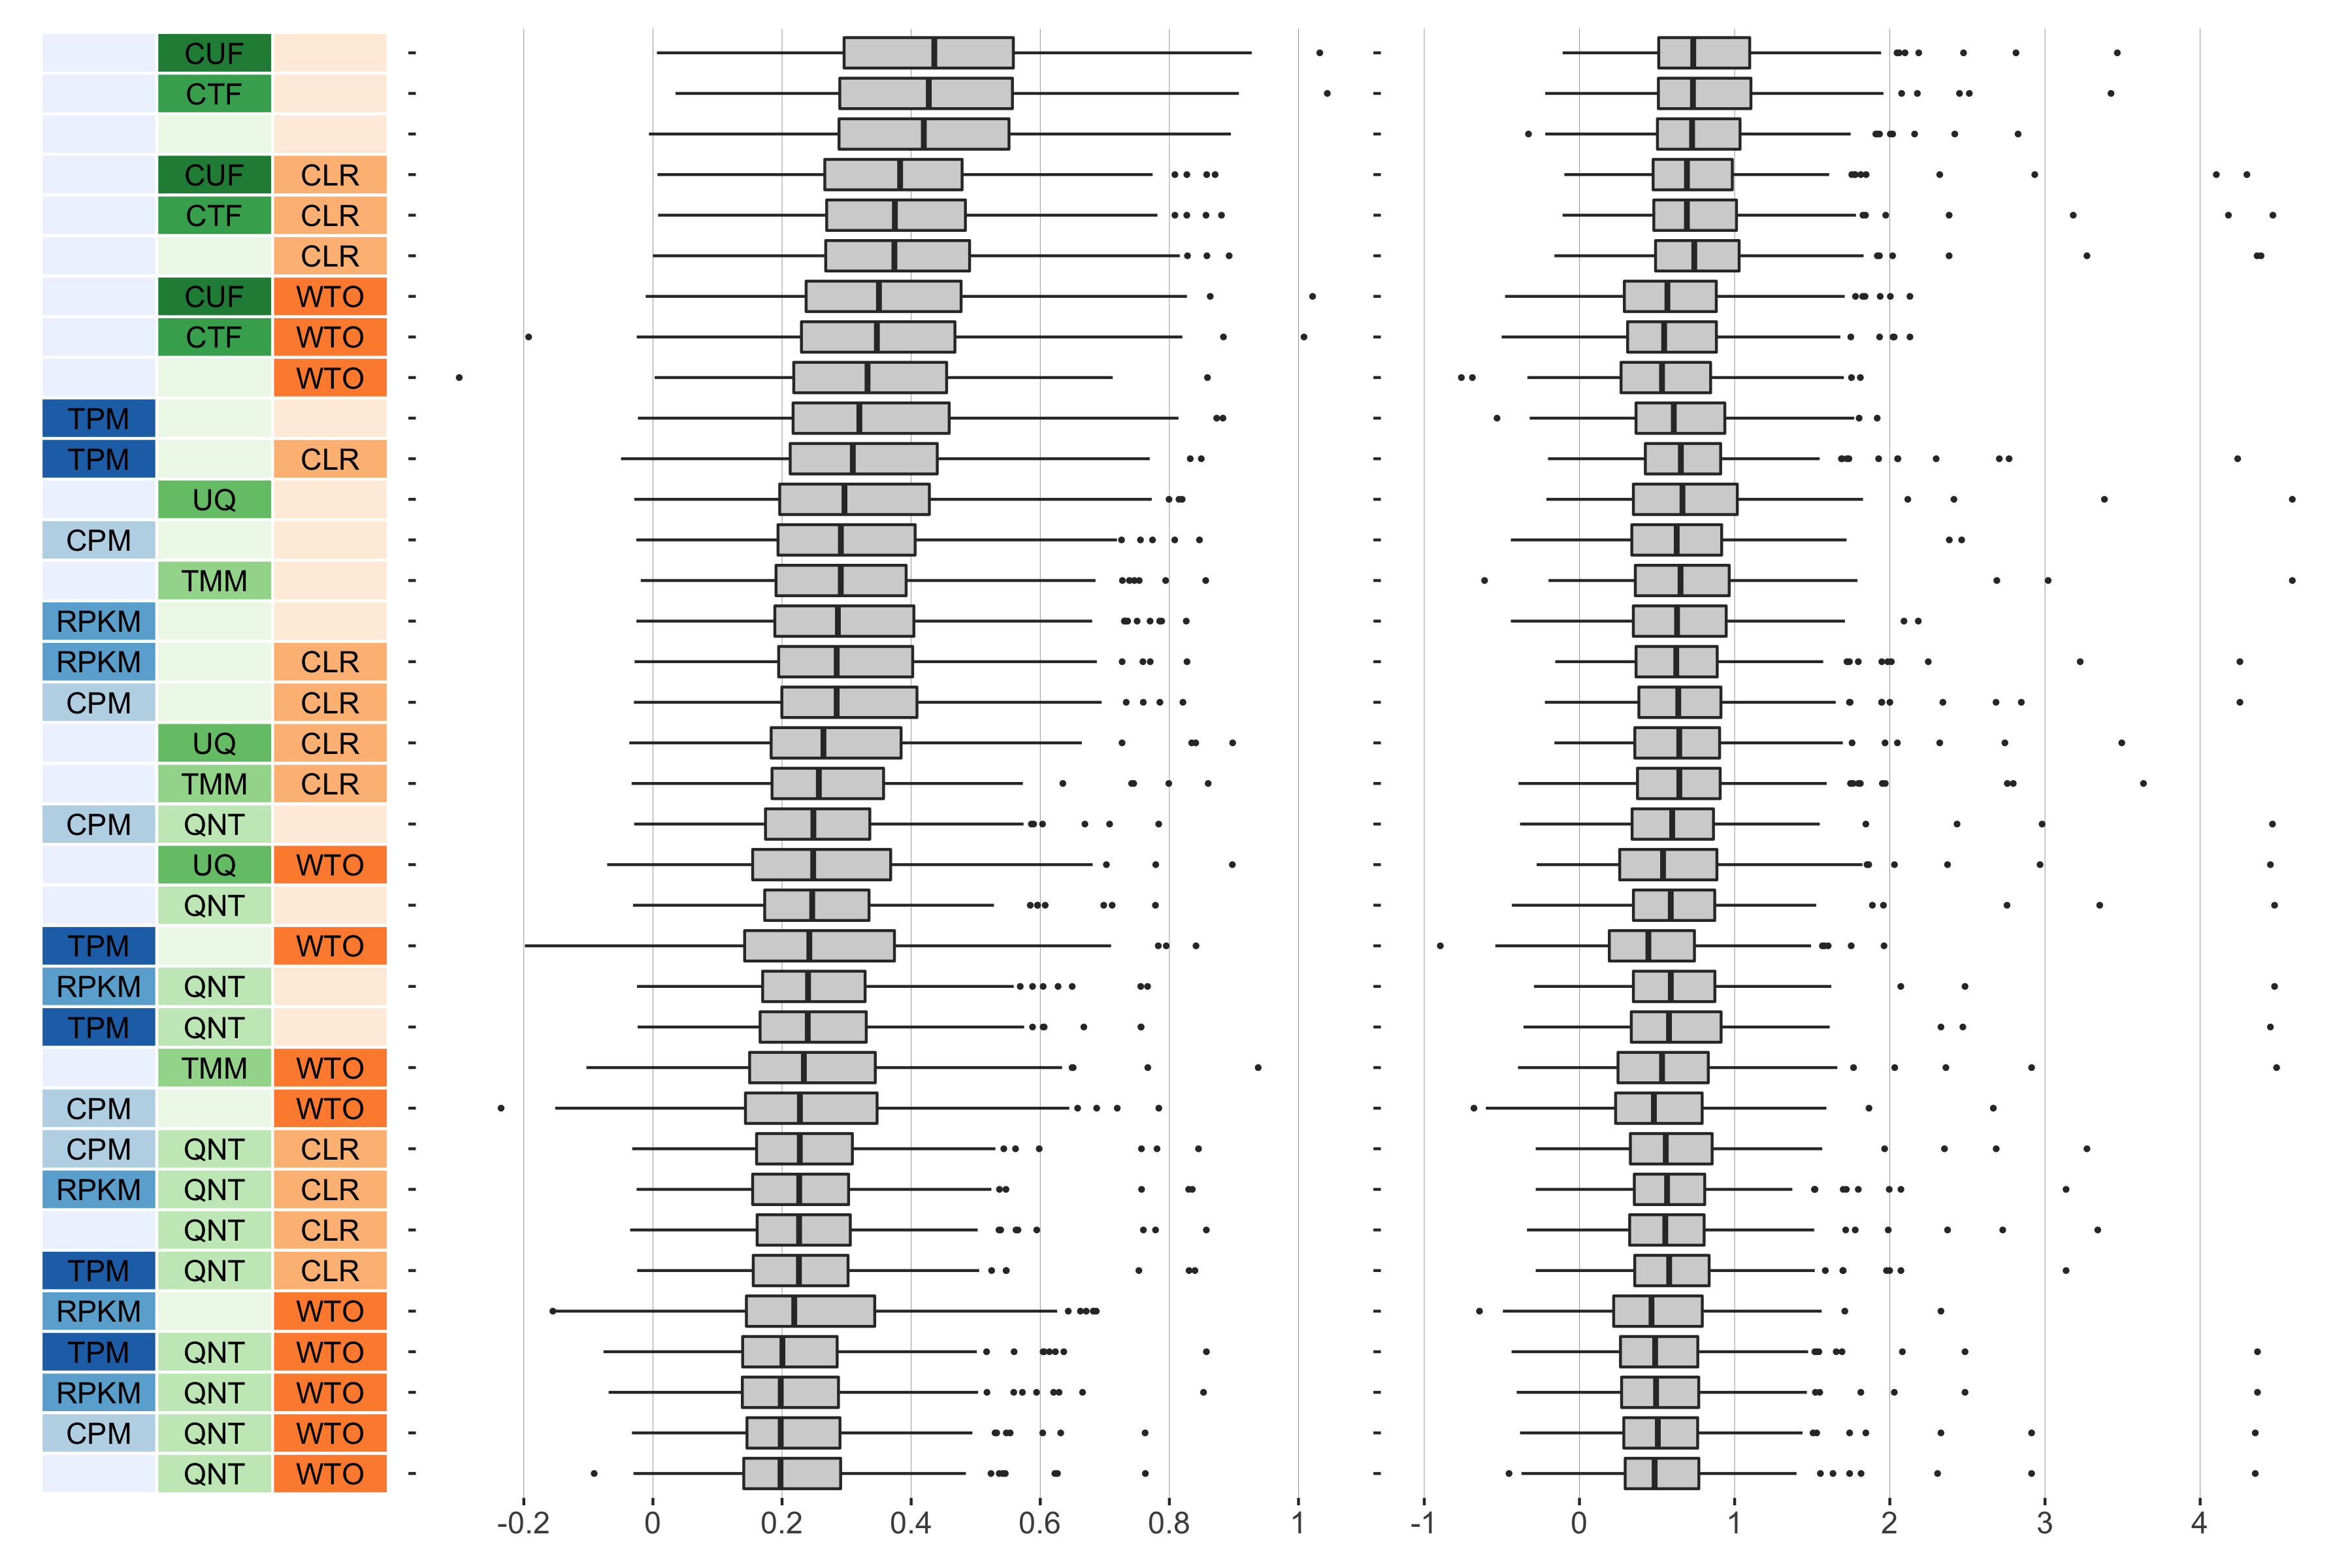 **Overall performance of workflows.** The plots show the aggregate accuracy of all SRA coexpression networks resulting from each individual workflow evaluated using the (**left**) tissue-naive and (**right**) tissue-aware gold standards. The workflows (rows) are described in terms of the specific method used in the within-sample normalization (blues), between-sample normalization (greens), and network transformation (oranges) stages. The performance of each workflow is presented as boxplots that summarizes the log2(p20r/prior) of each workflow where auPRC is the area under the precision recall curve. The workflows are ordered by their median log2(p20r/prior) for the tissue-naive data.